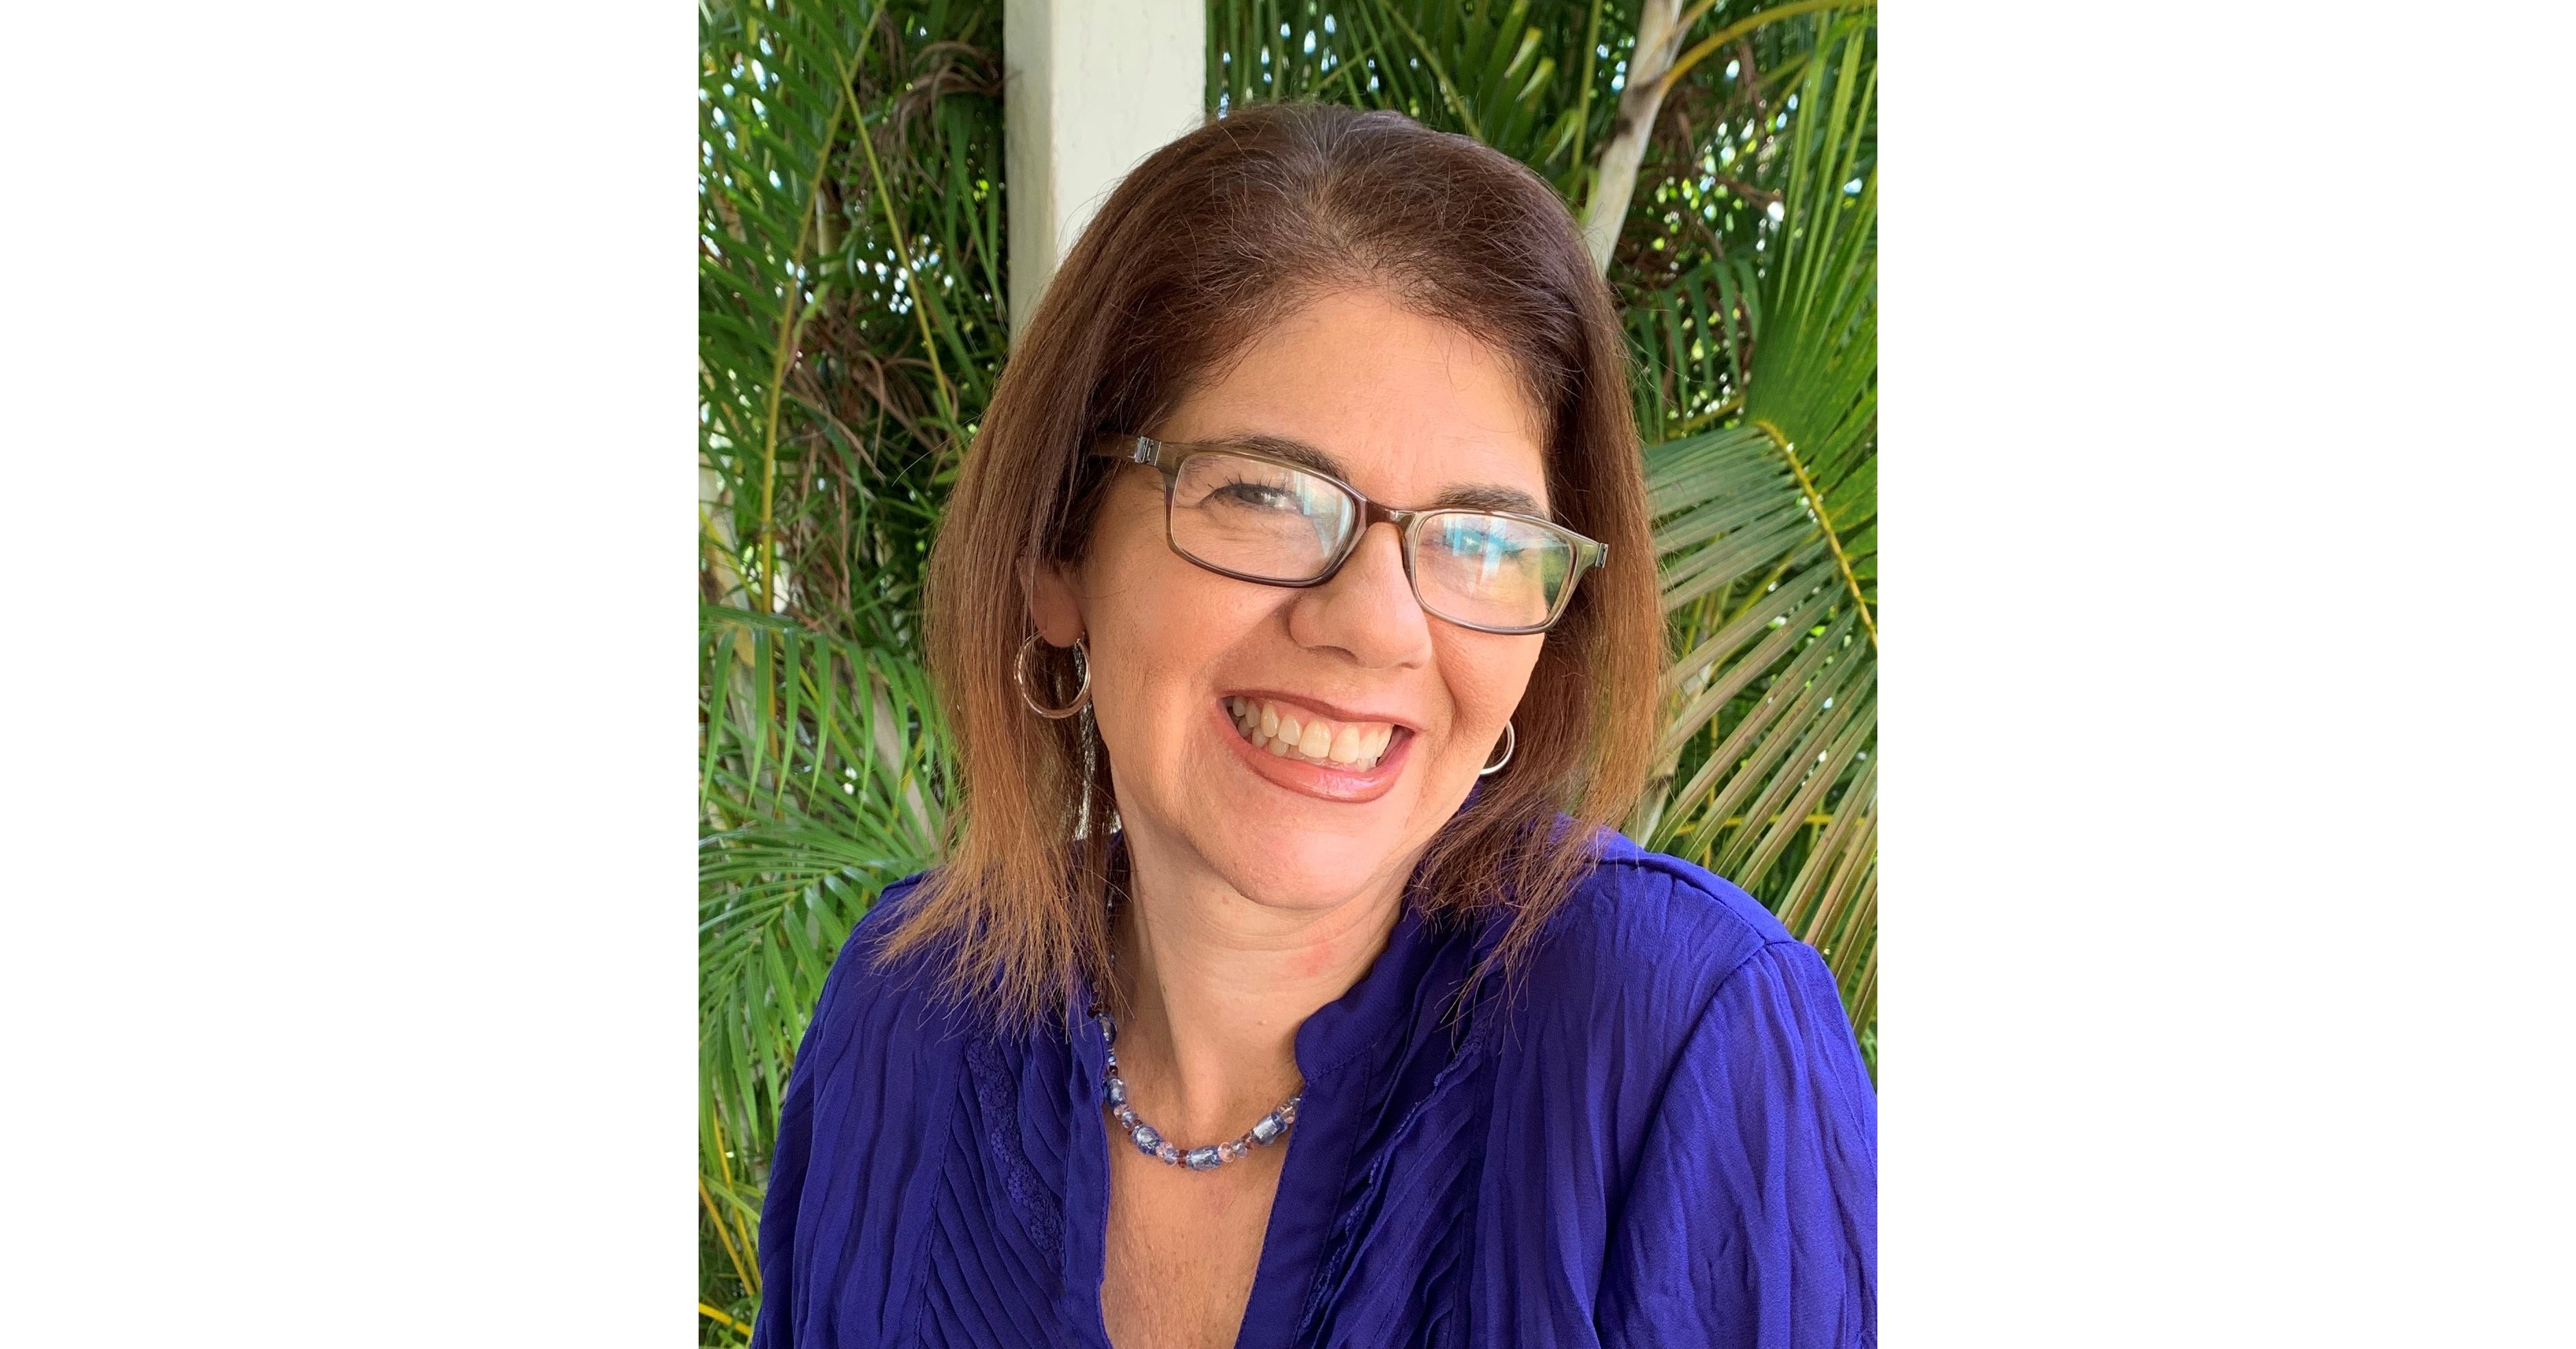 ZUBI'S ISABELLA SANCHEZ NAMED NEW CHAIR OF THE HISPANIC MARKETING COUNCIL